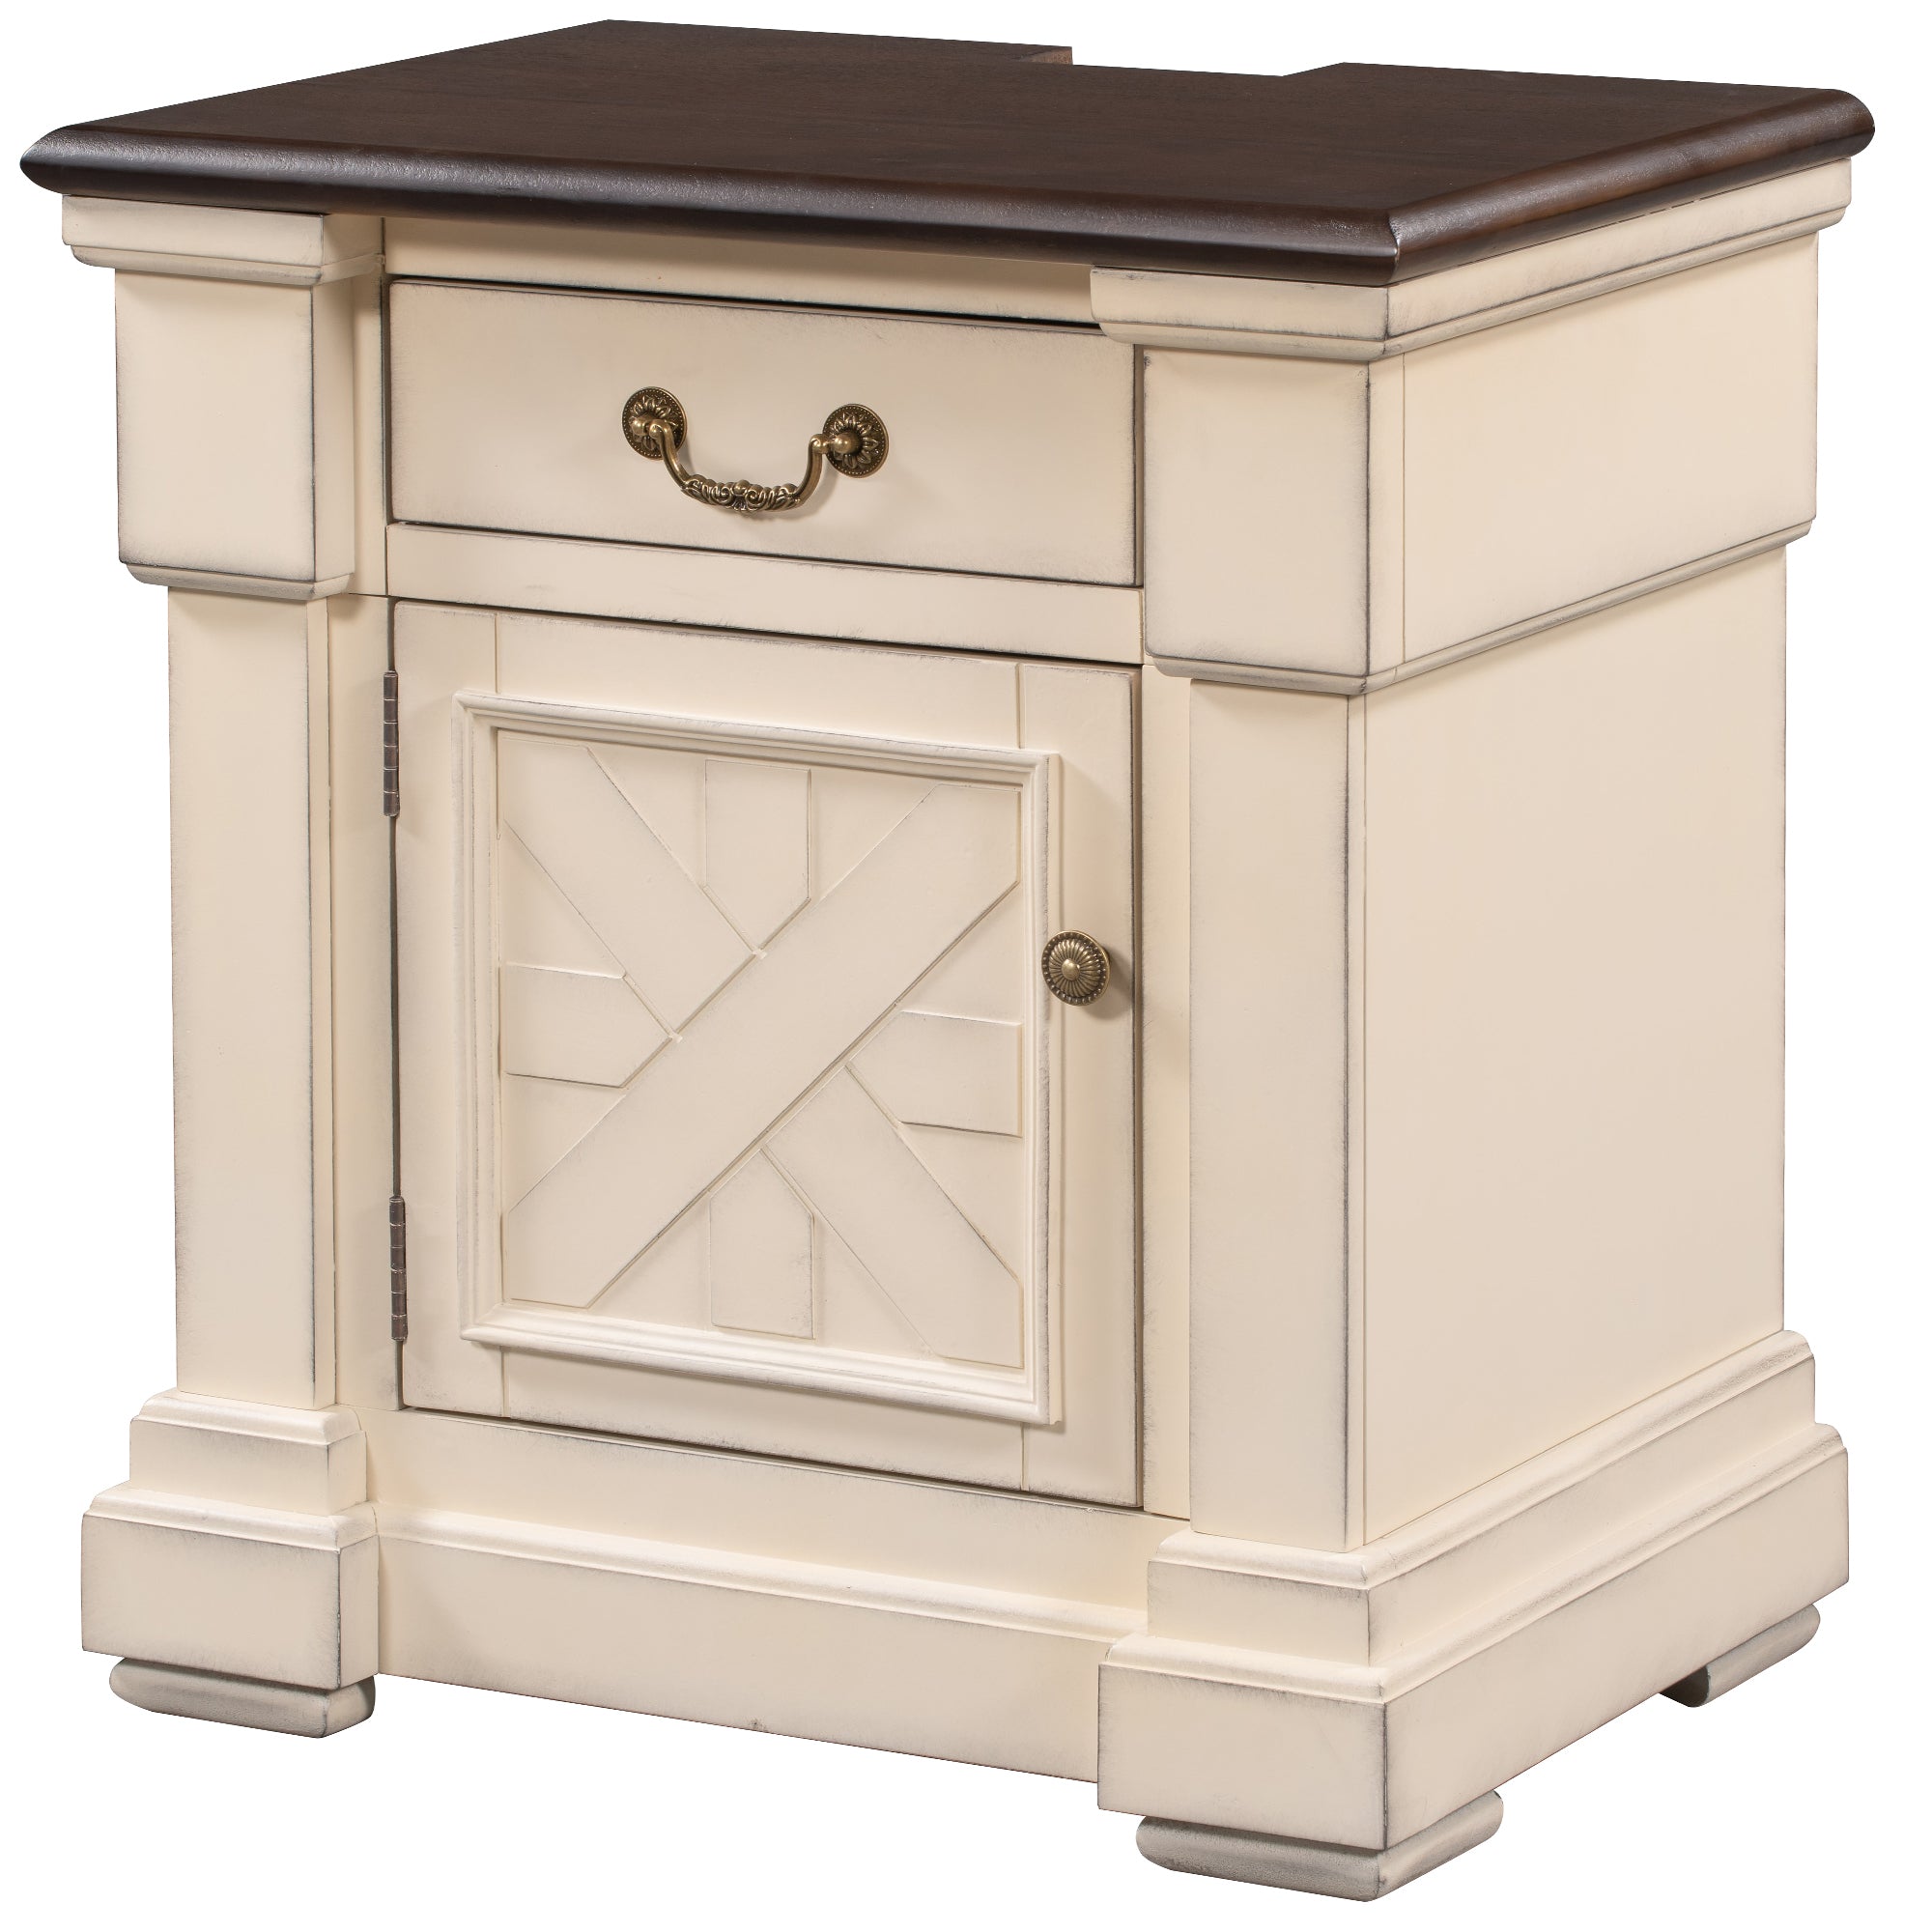 1 Drawer Wood Nightstand with USB Ports